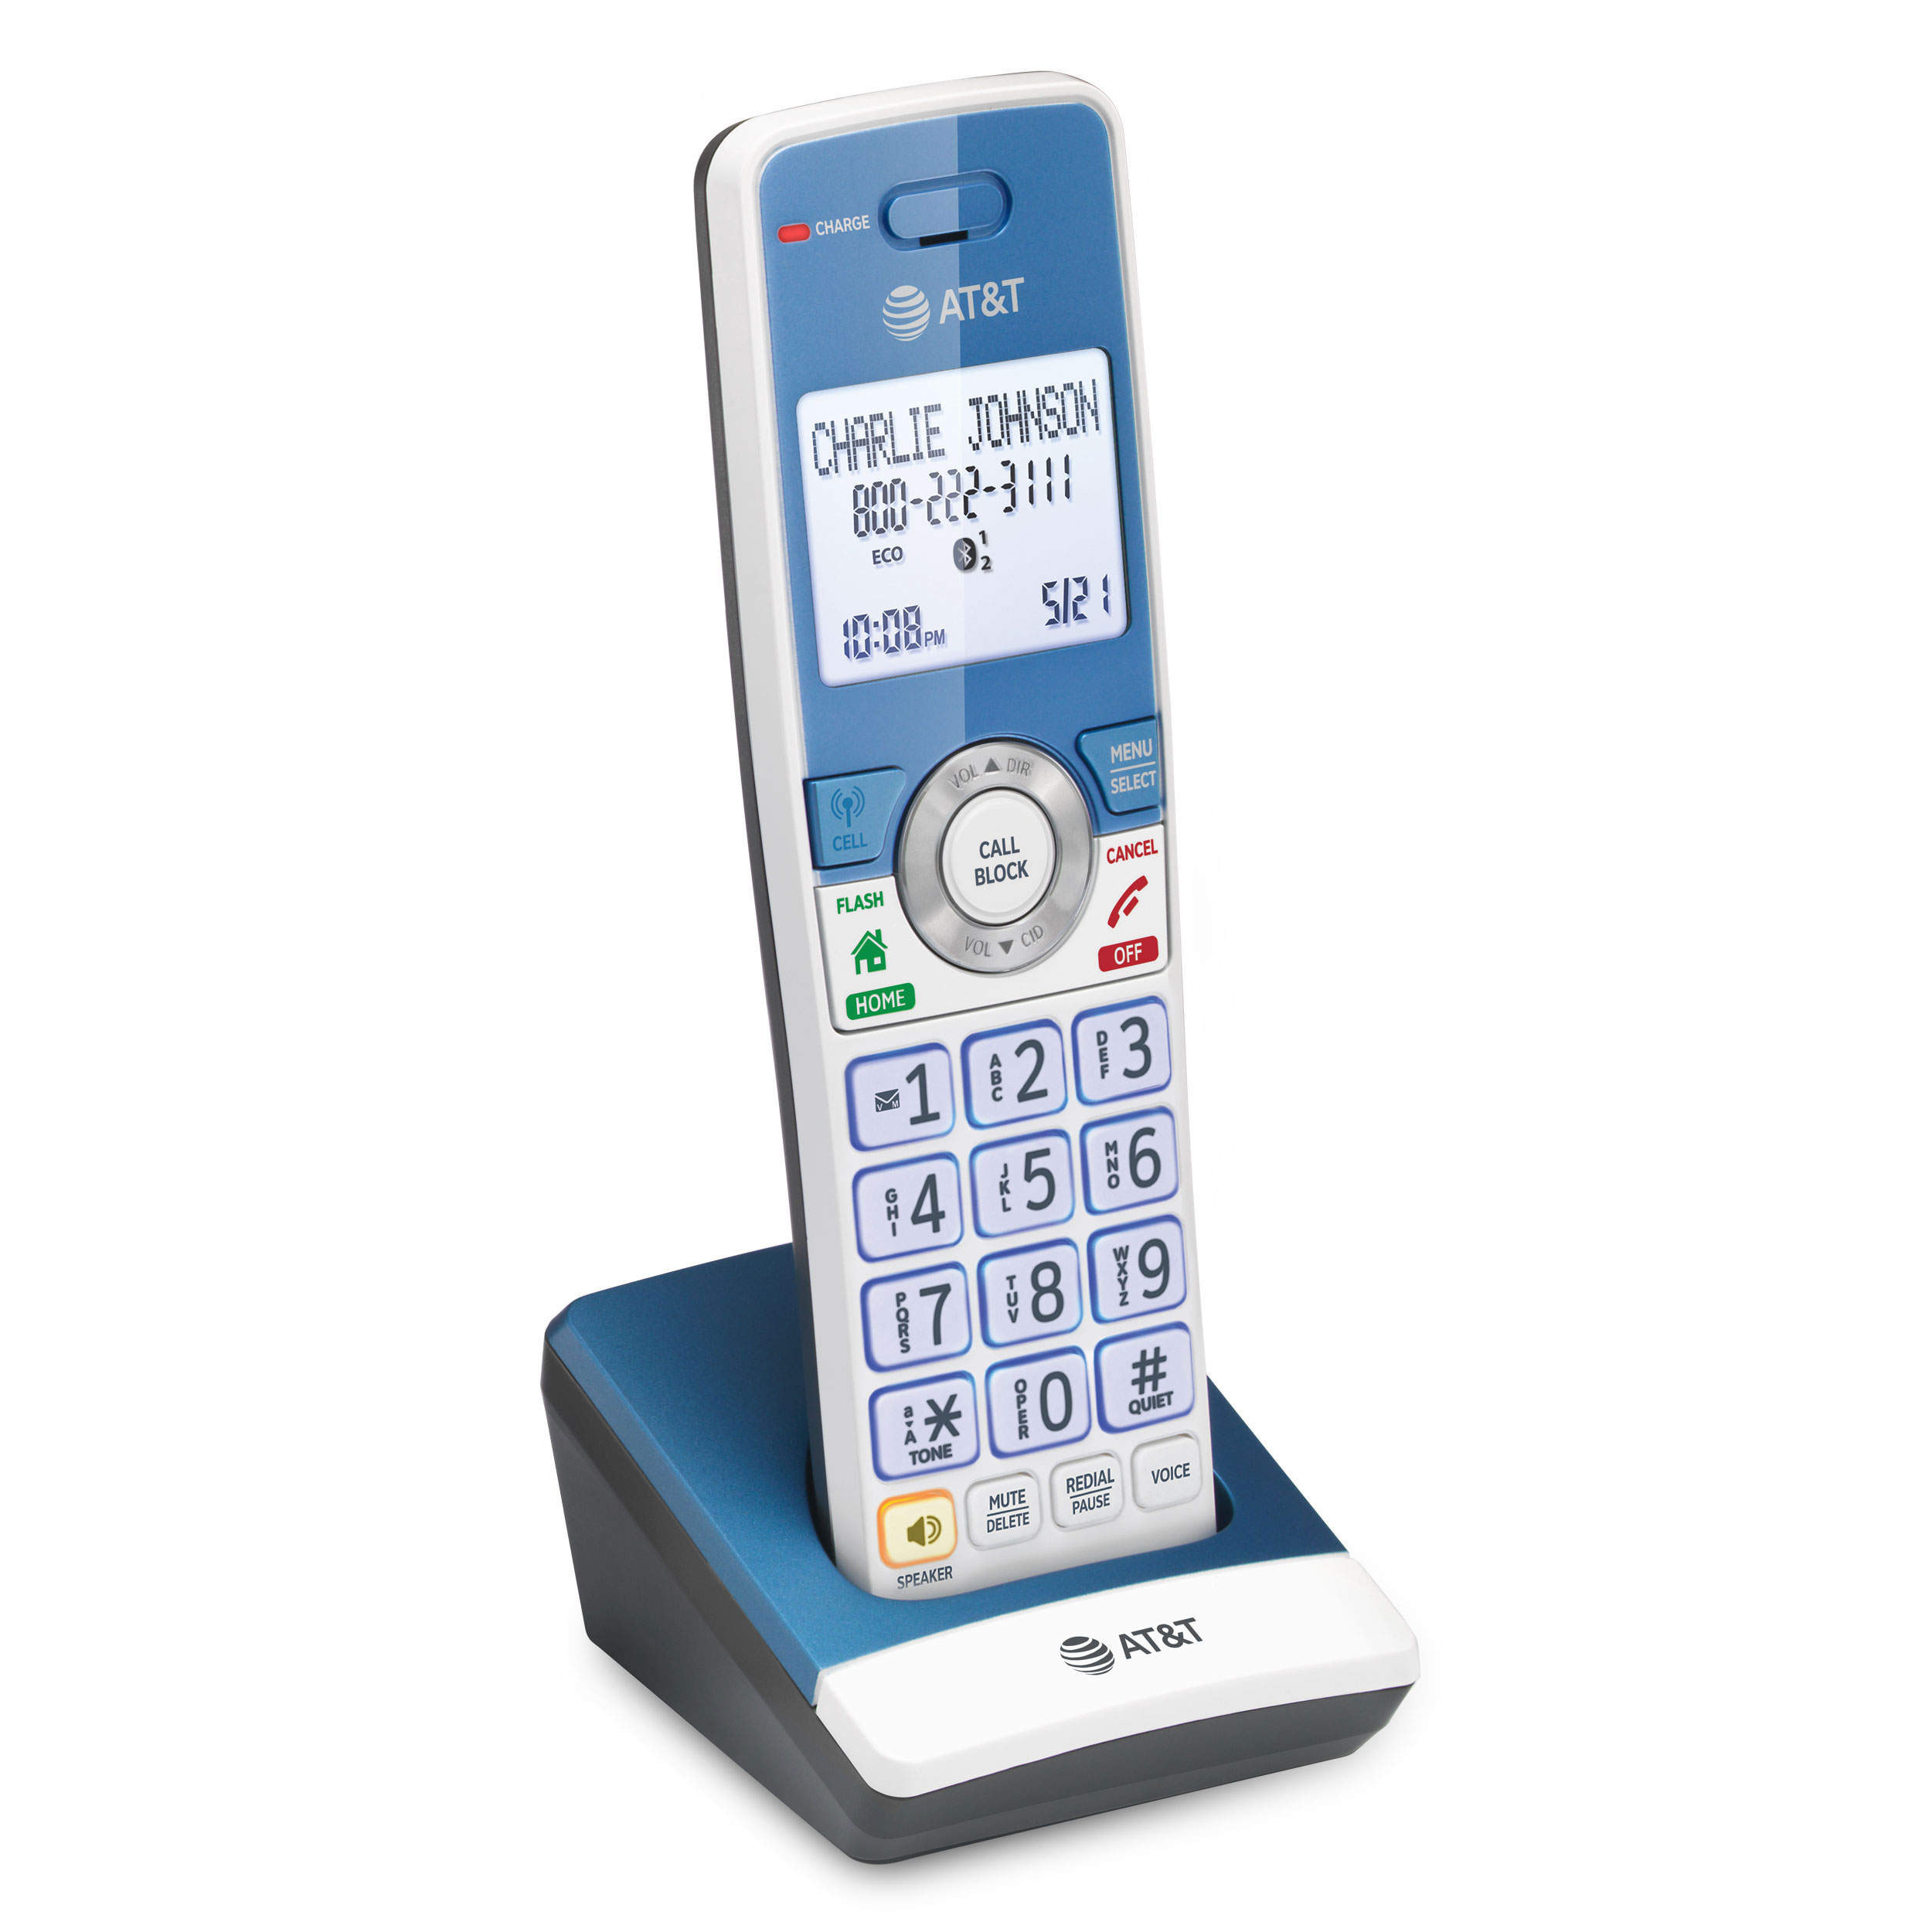 3-Handset Expandable Cordless Phone with Unsurpassed Range, Bluetooth Connect to Cell™, Smart Call Blocker and Answering System - view 6